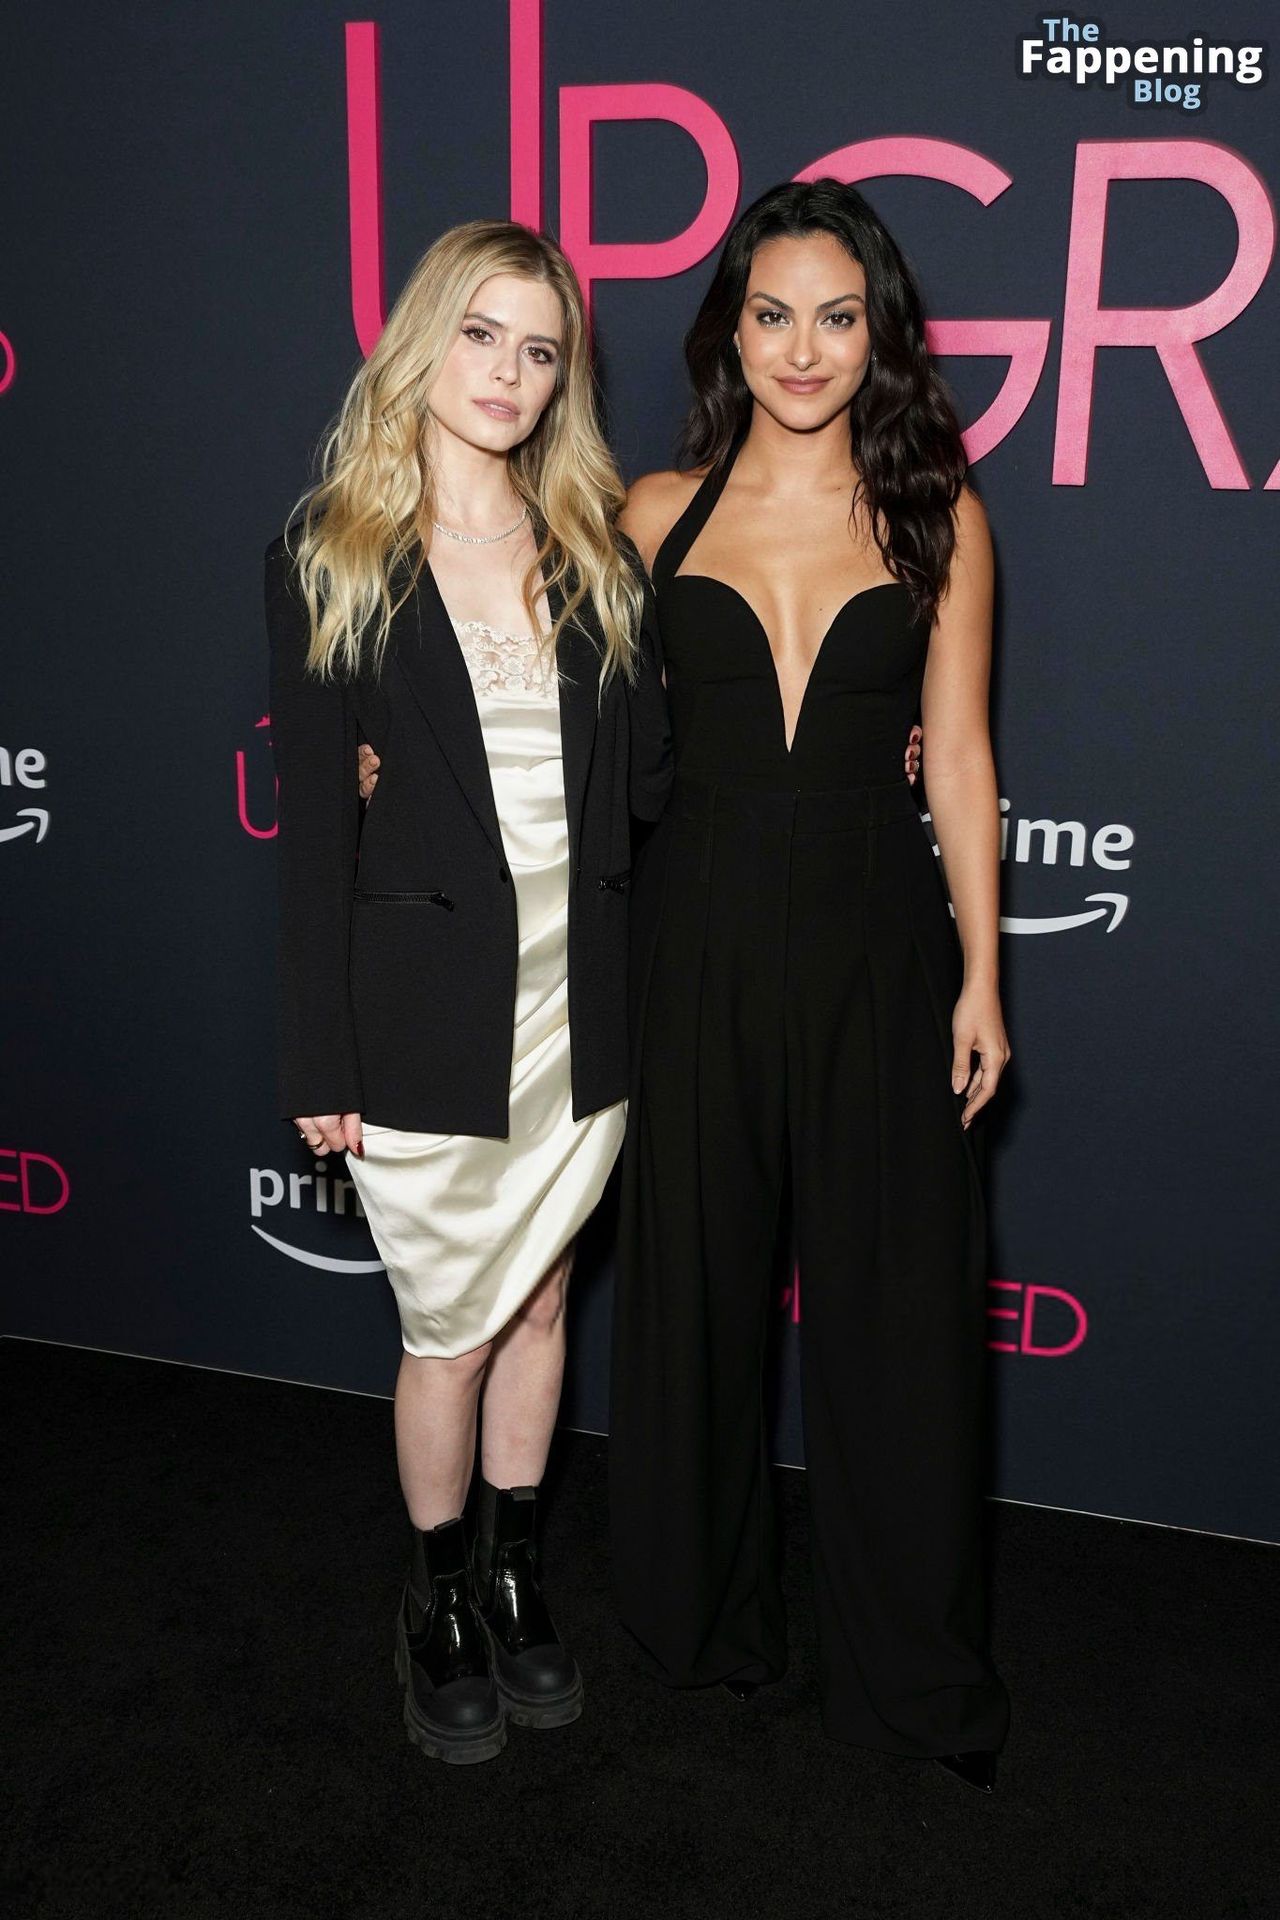 Camila Mendes Looks Hot in a Black Dress at the “Upgraded” Screening (37 Photos)